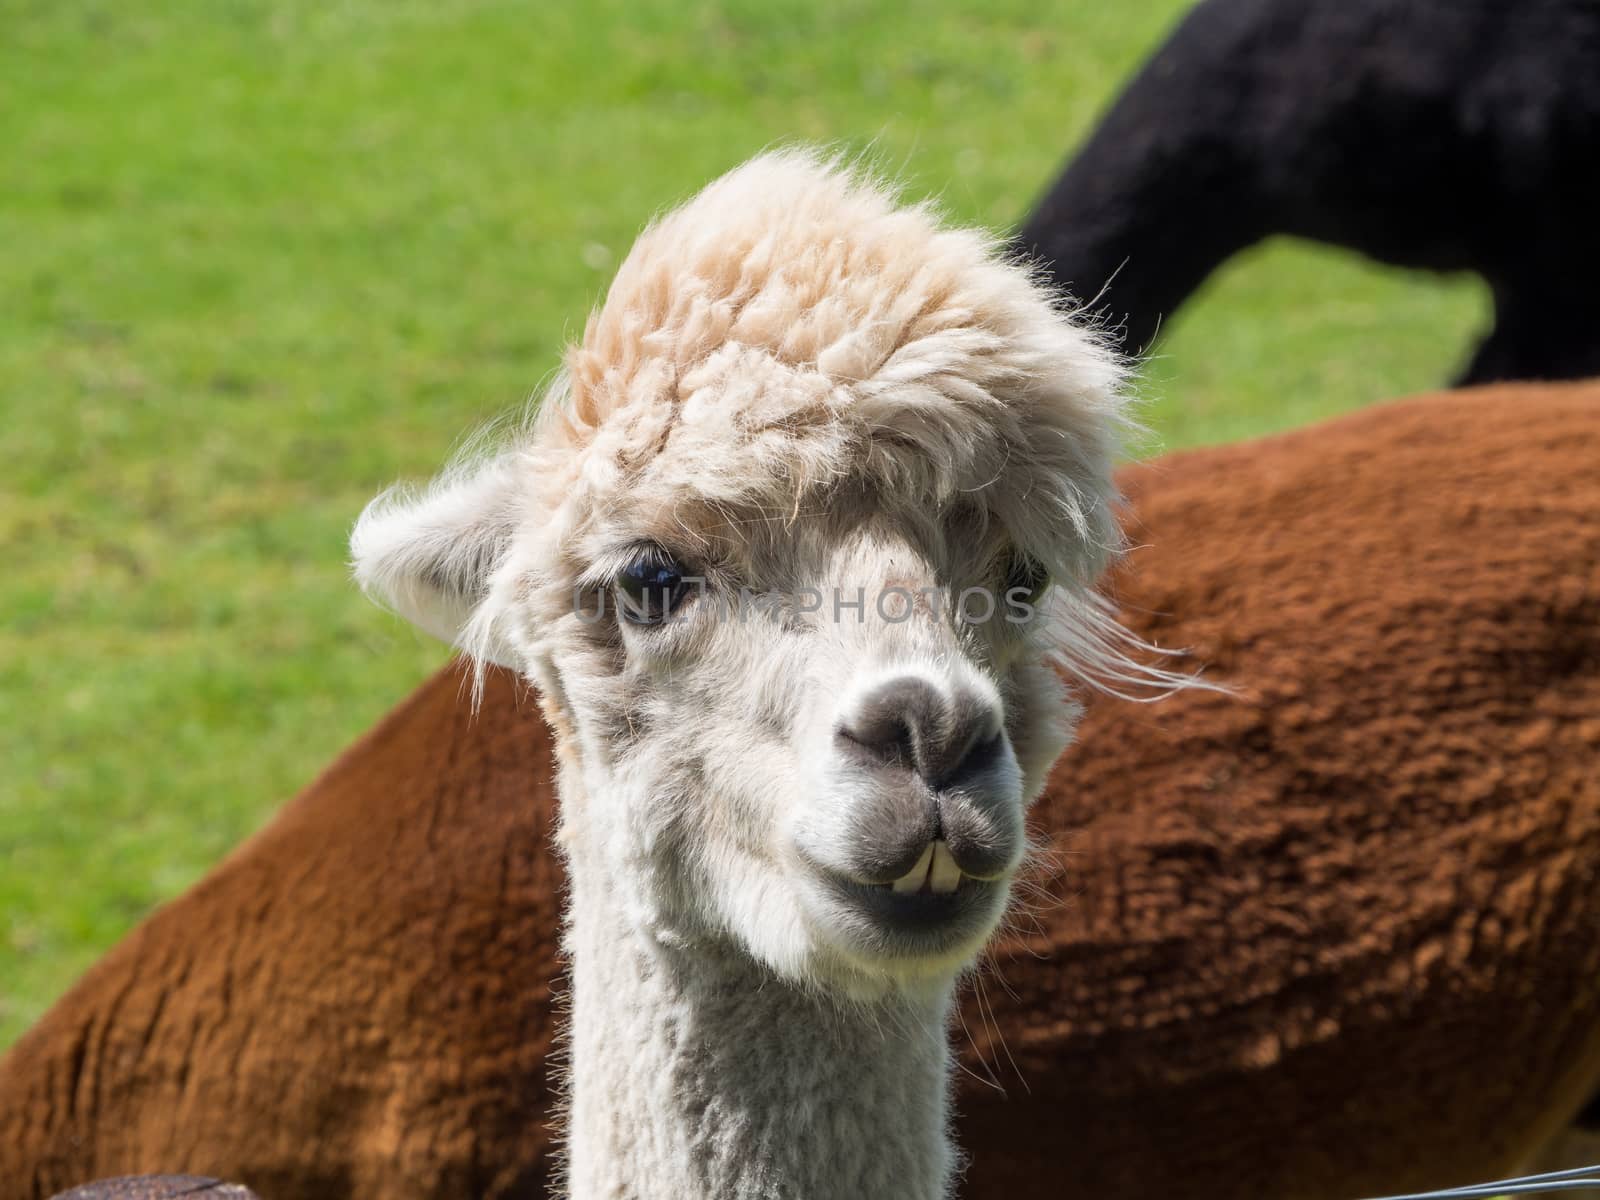 Closeup portrait of a white alpaca with black and brown animals in background